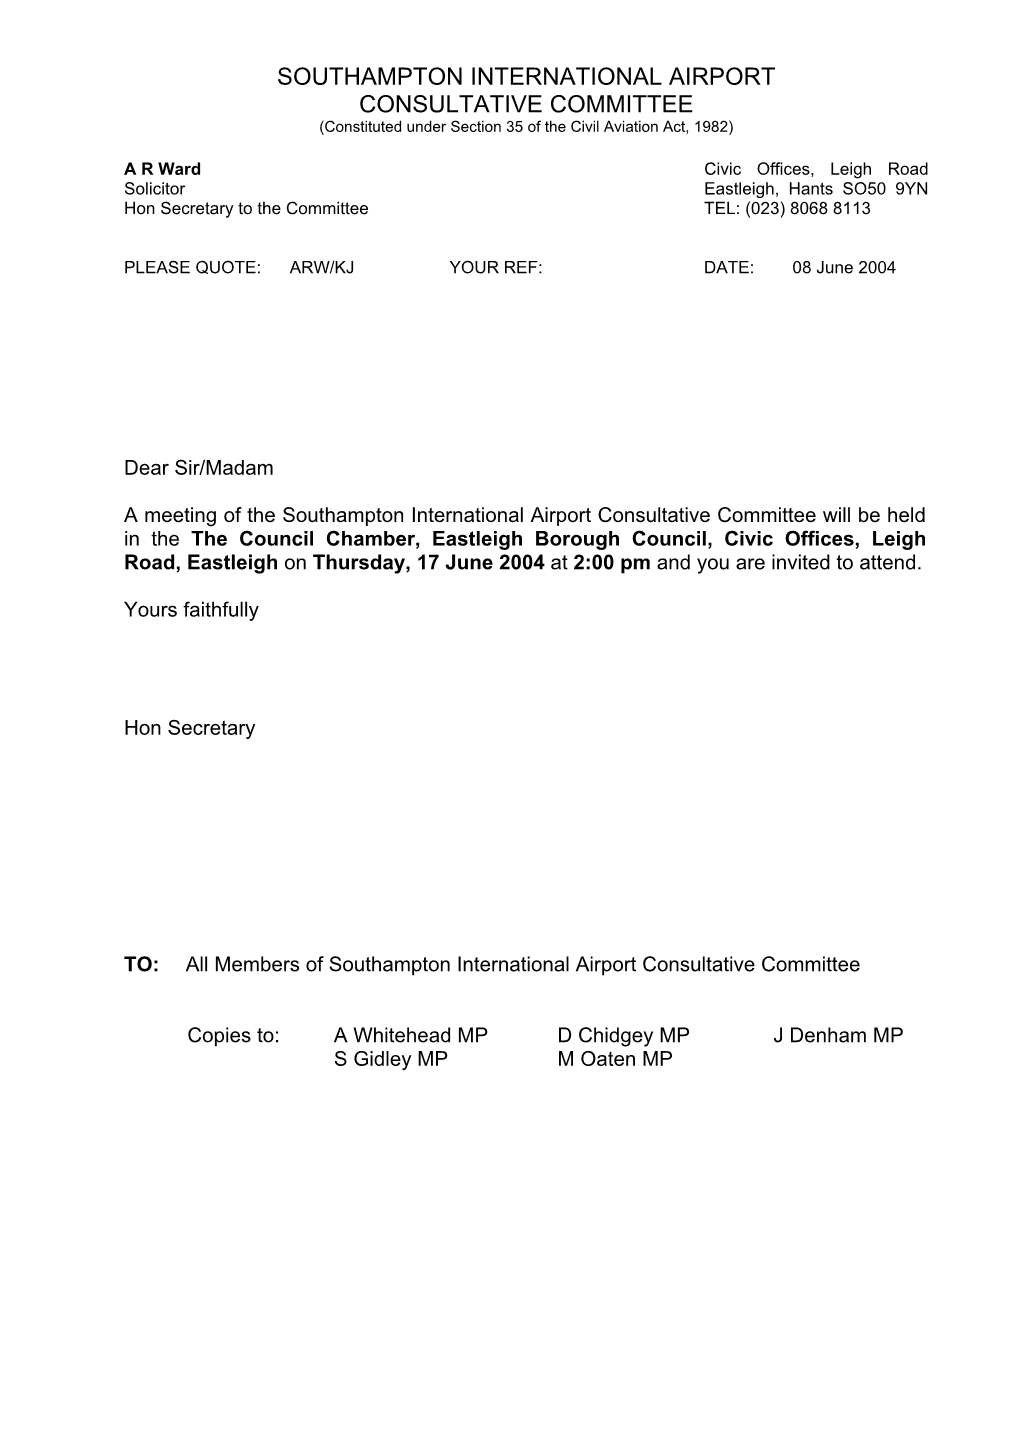 SOUTHAMPTON INTERNATIONAL AIRPORT CONSULTATIVE COMMITTEE (Constituted Under Section 35 of the Civil Aviation Act, 1982)